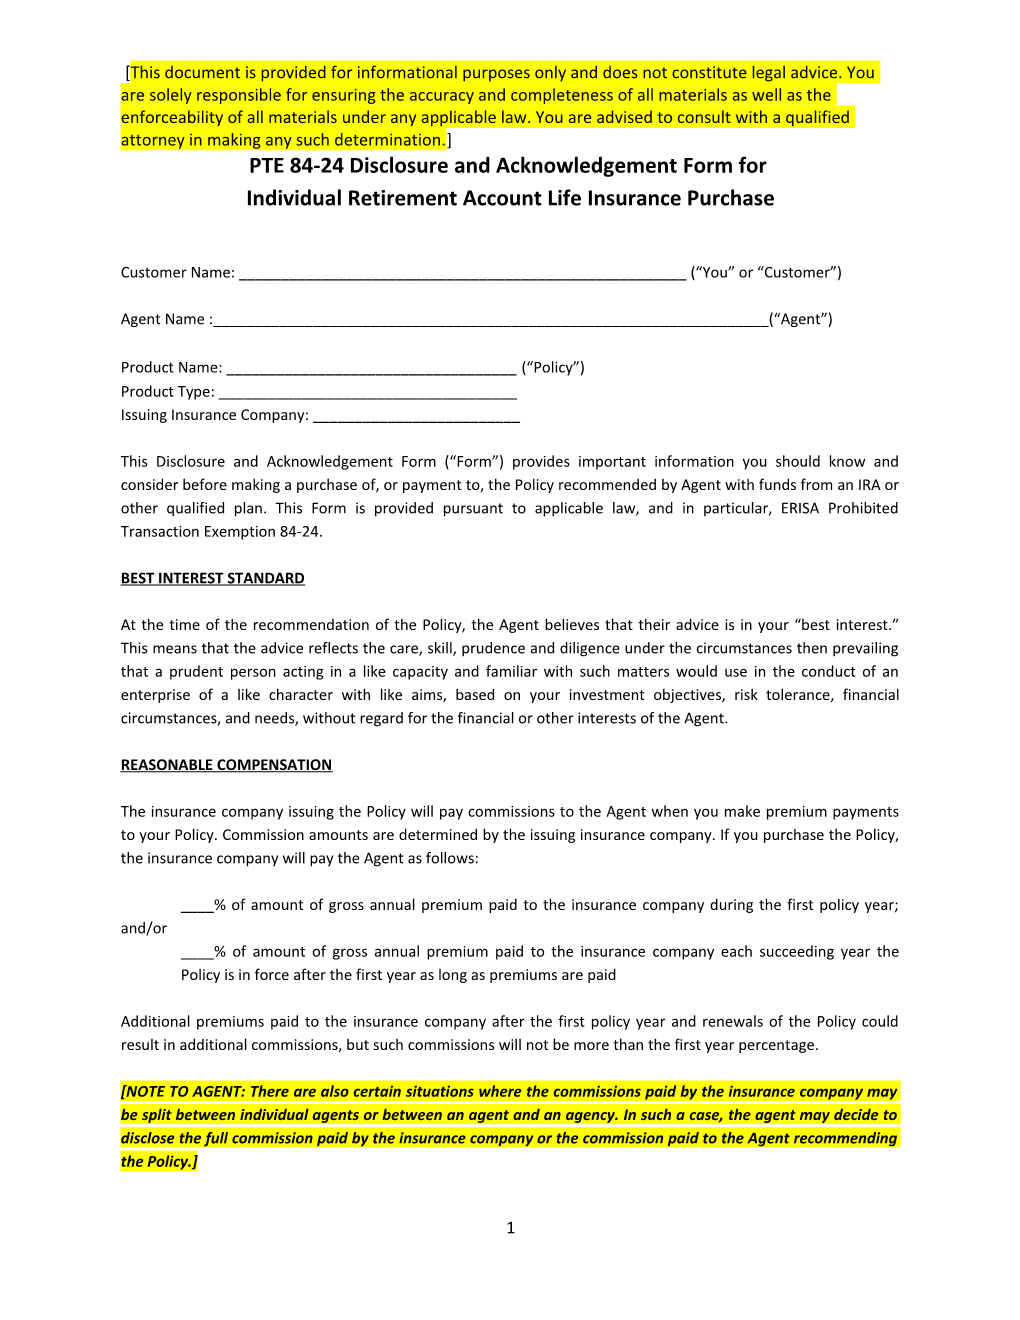 PTE 84-24 Disclosure and Acknowledgement Form For